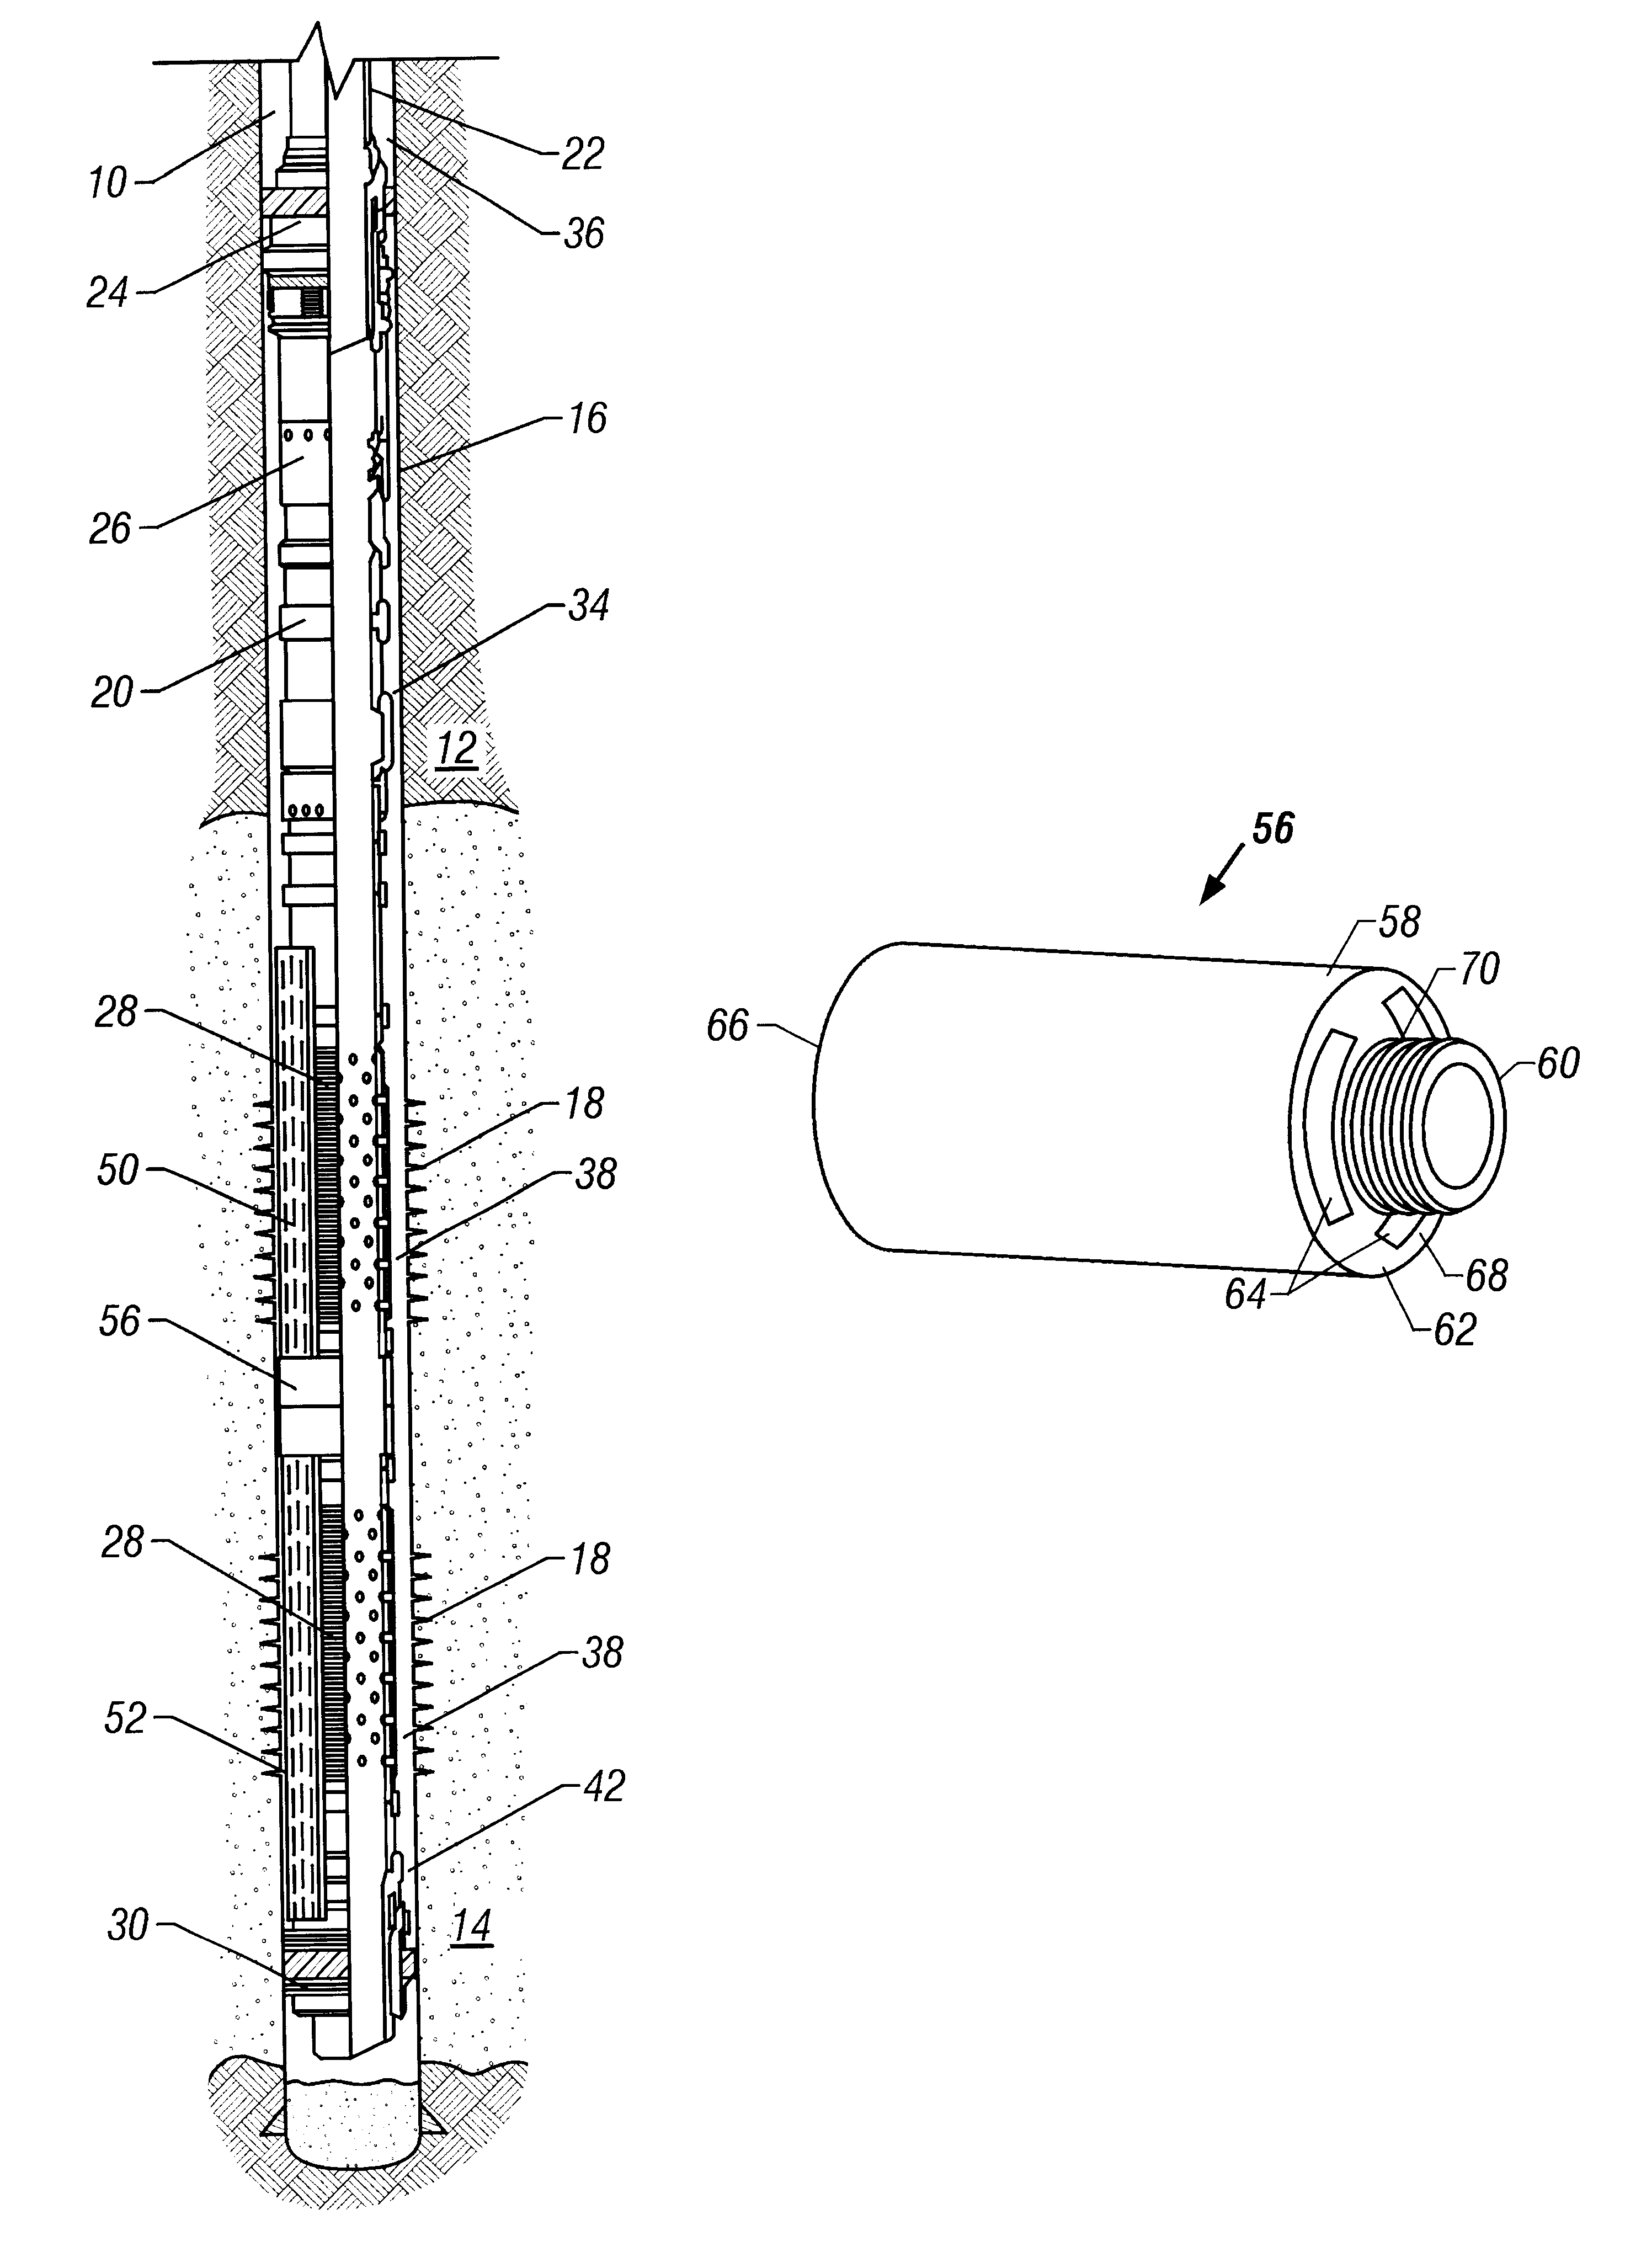 Apparatus and method for alternate path system